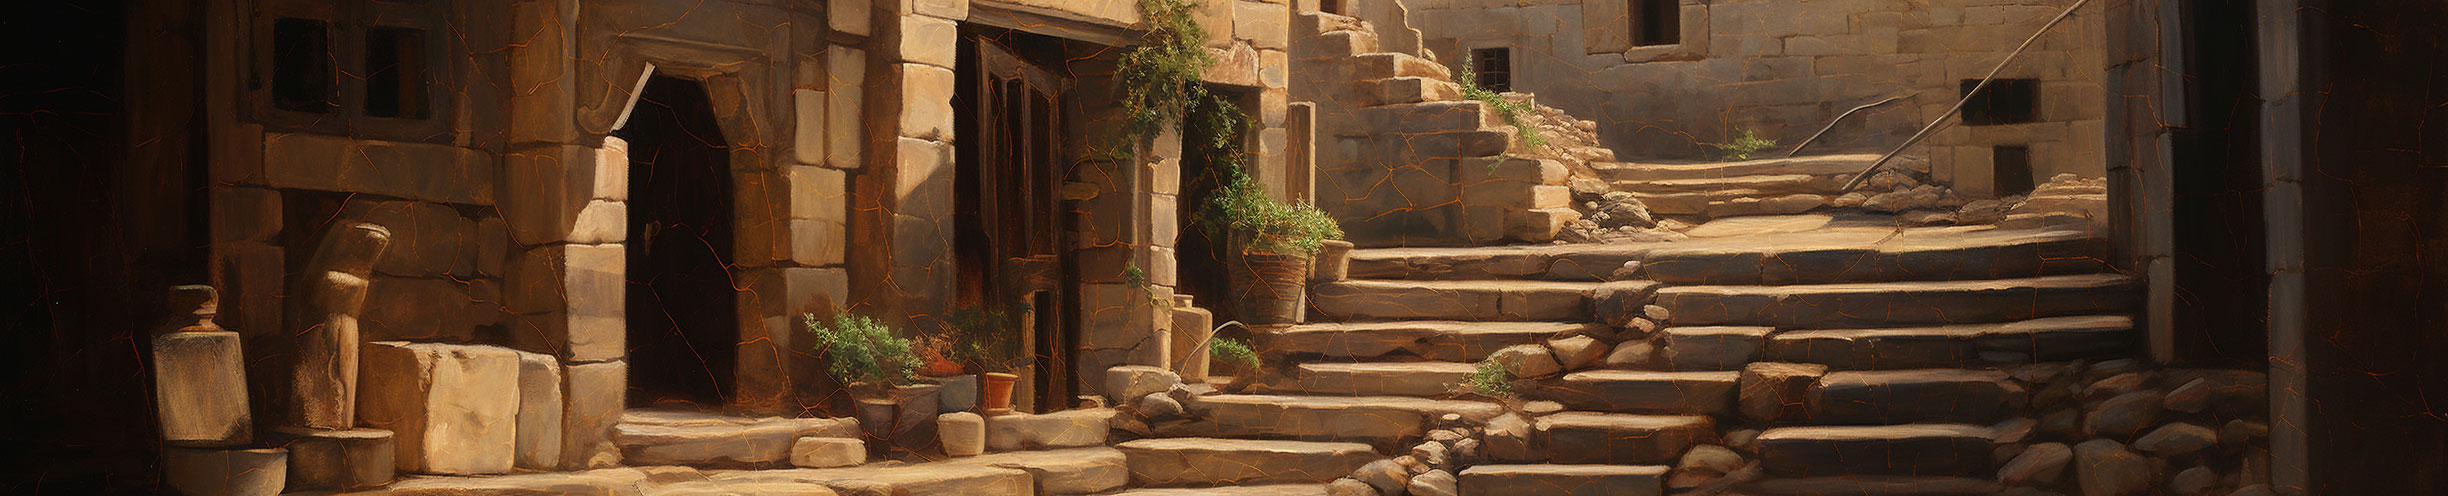 tychodreq_a_finely_detailed_oil_painting_of_a_stone_stairs_lead_2323bd07-eb34-4d38-b7bd-5fd137fec6c9.jpg